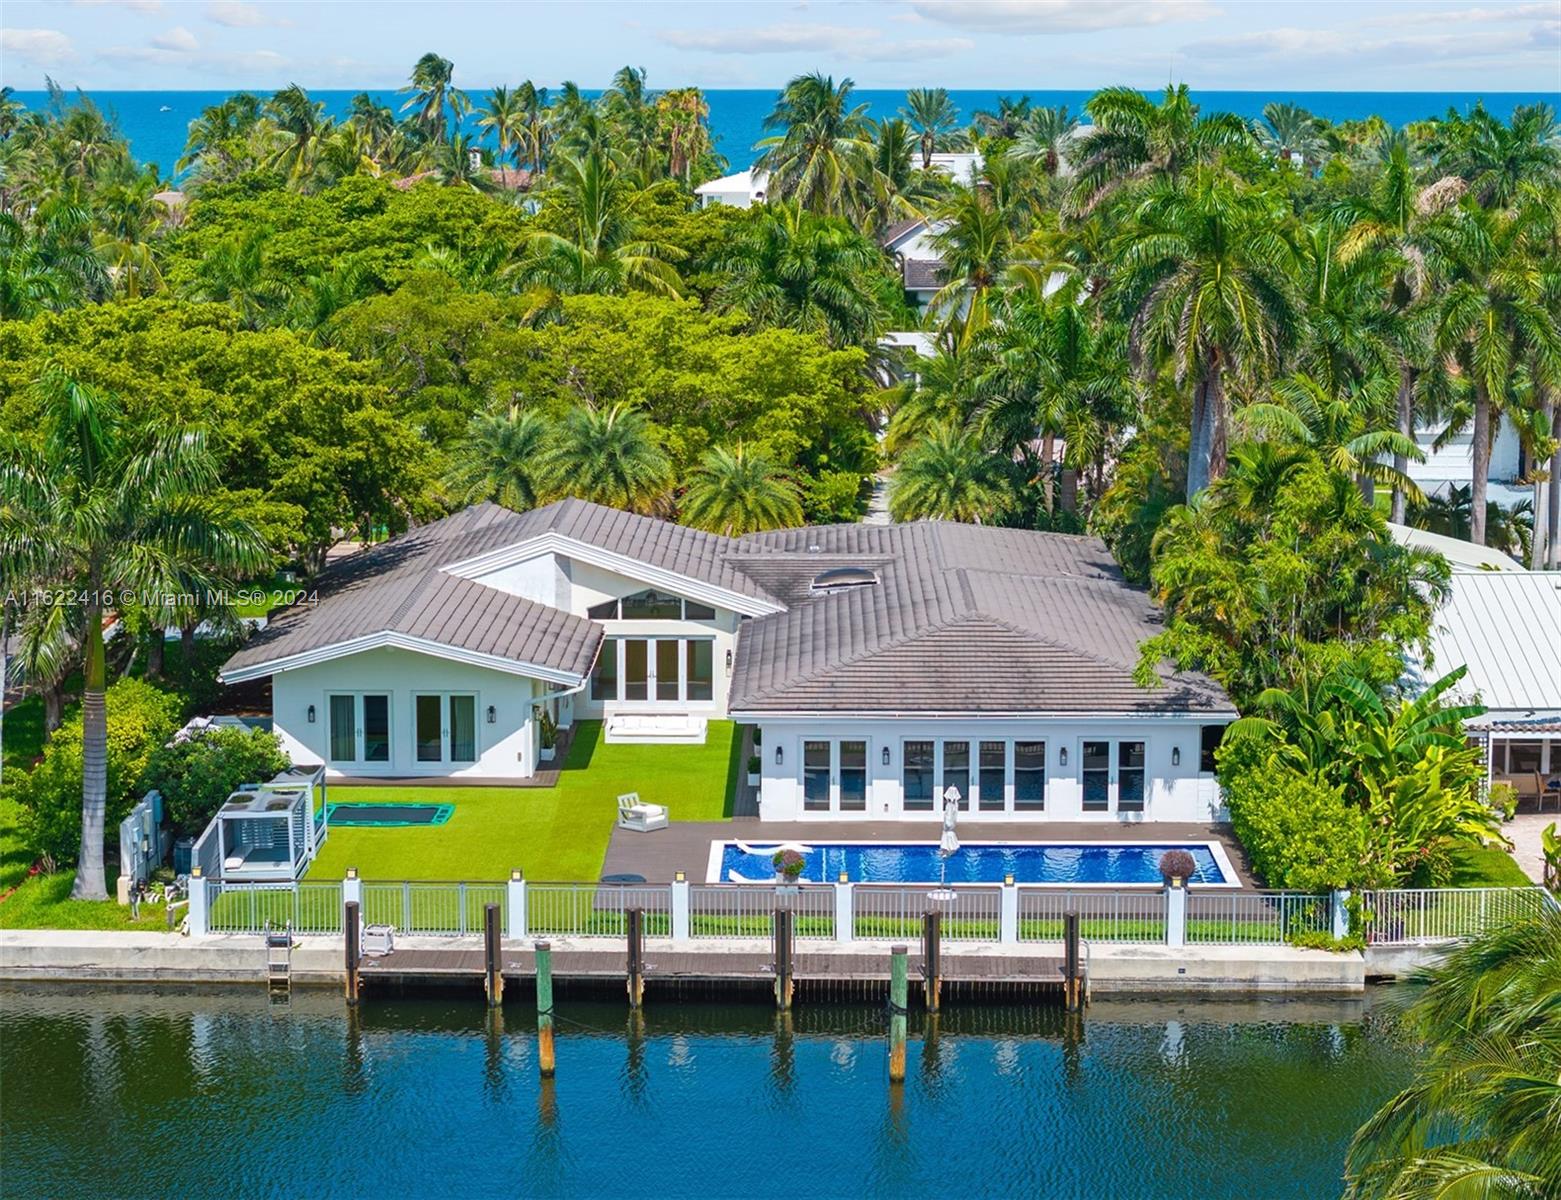 Discover your dream home at 194 Golden Beach Dr, nestled in the prestigious Golden Beach, FL. This turnkey residence epitomizes luxury living with 100’ of waterfront access, ideal for boaters looking to dock a large yacht. Spanning 17,500 SF, the property boasts 6 bedrooms, 5.5 bathrooms, and an office space, ensuring ample room for living and entertaining. The property is a corner lot with a wide driveway allowing to park many cars and it additionally has a 2-car garage. Enjoy the best of coastal living with exclusive walking distance access to a private beach, parks, and sports courts, all within Miami-Dade County's finest residential community. This is more than a home—it’s a lifestyle redefined.